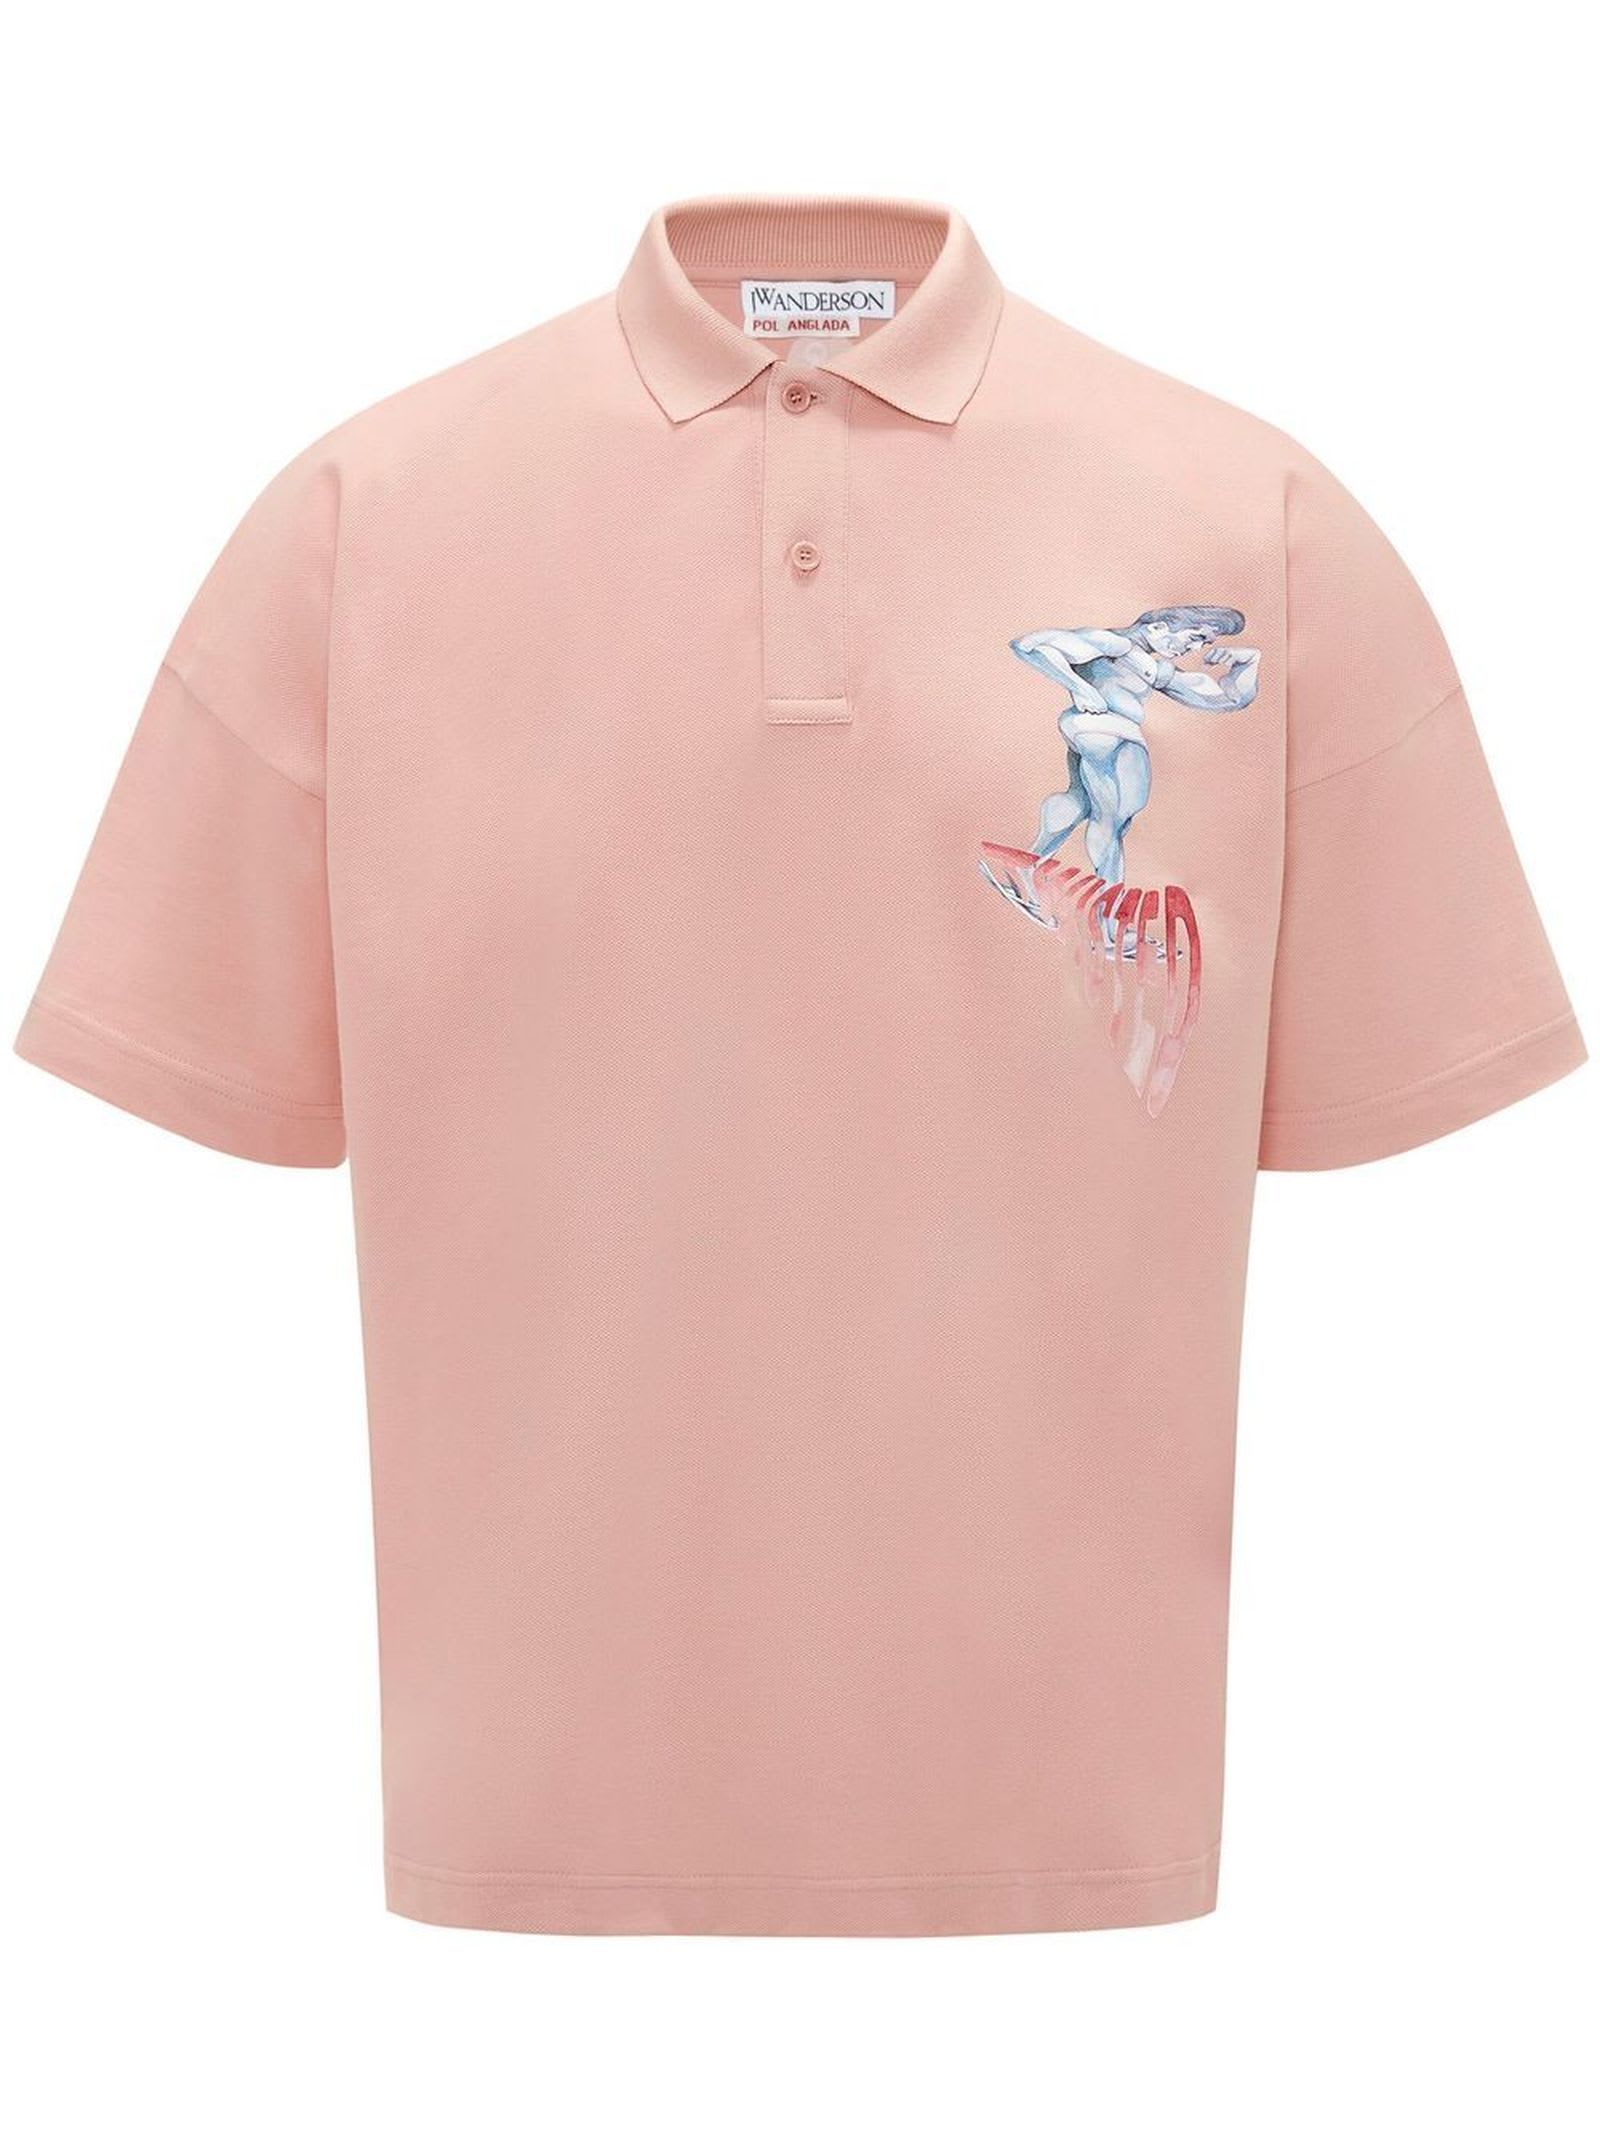 JW ANDERSON ROSE PINK COTTON POLO SHIRT